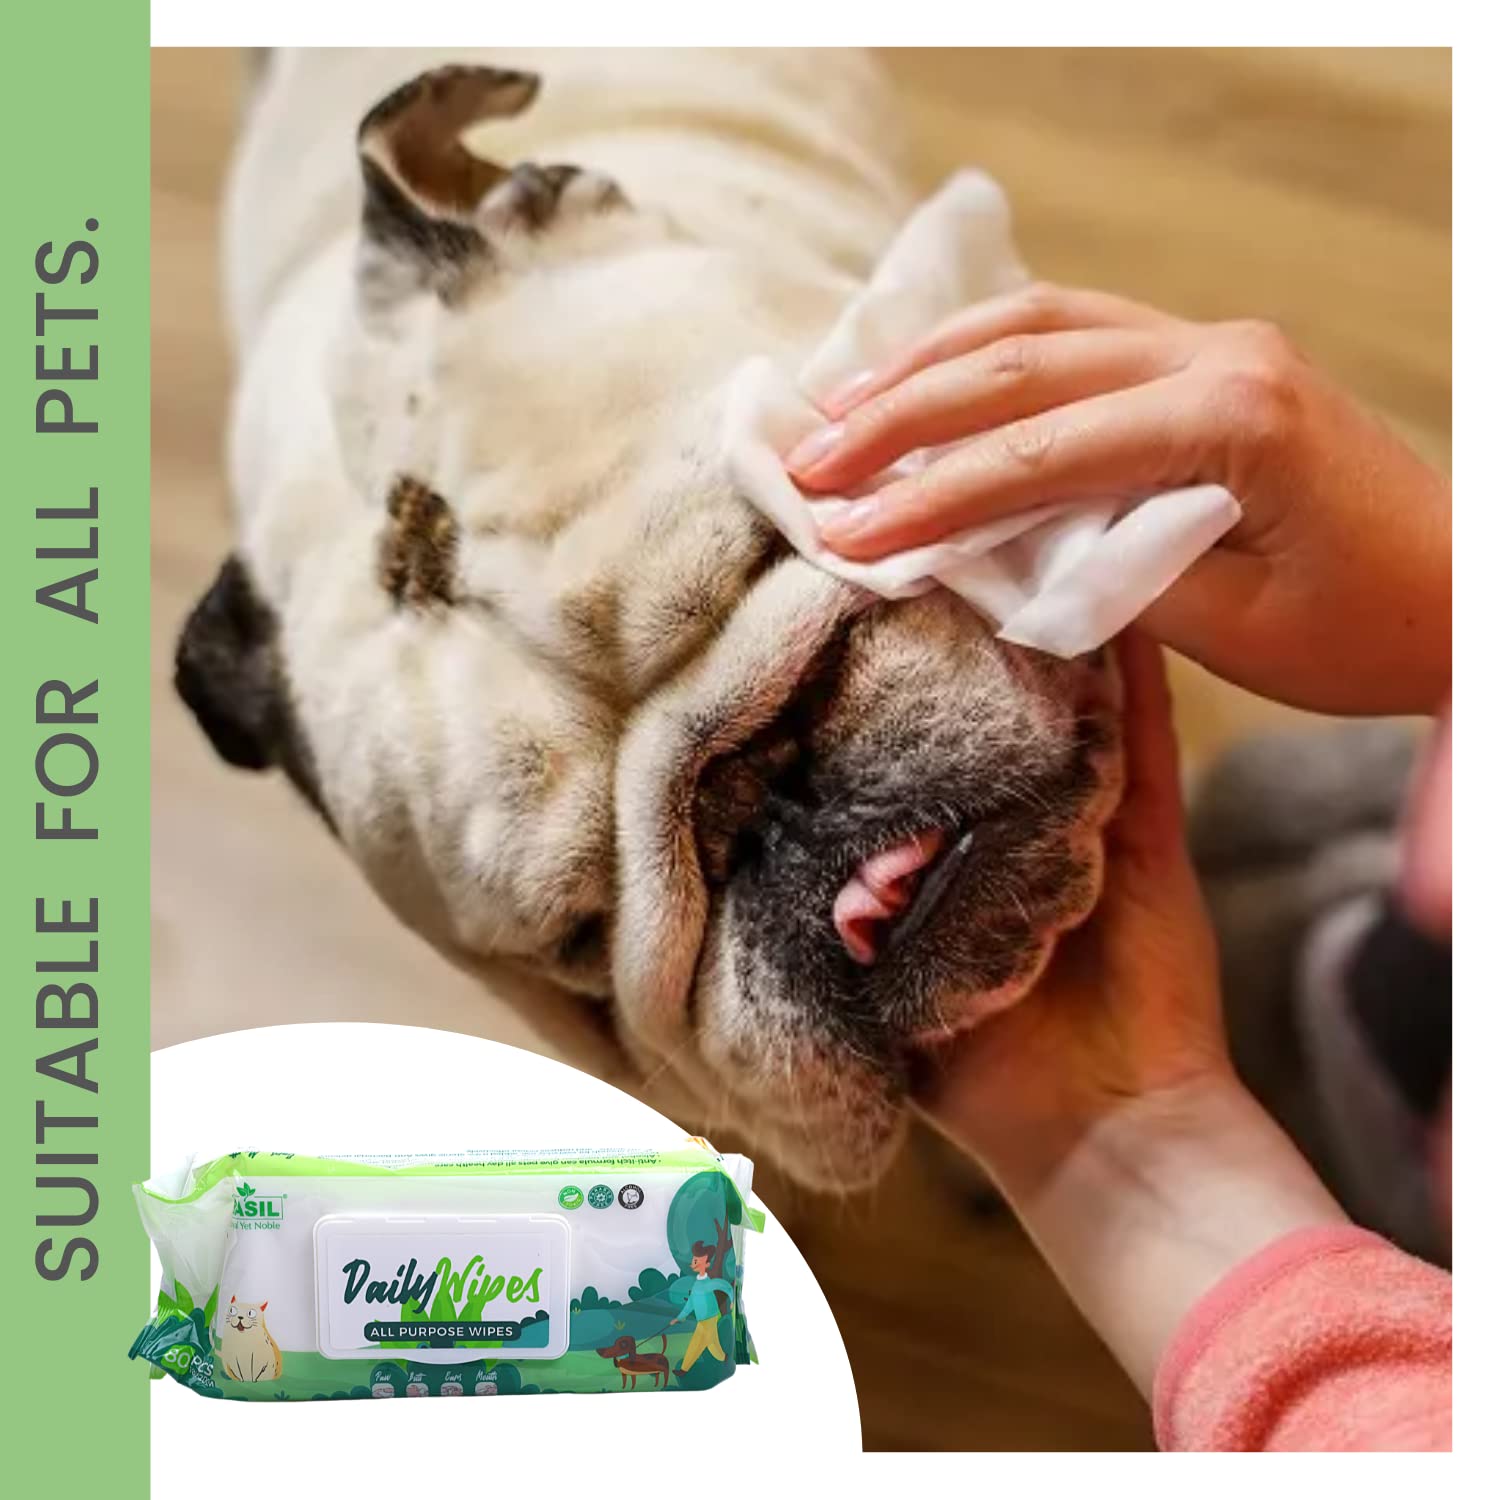 Pet Wipes for Puppies, Dogs and Cats - Basil (80 Wipes)